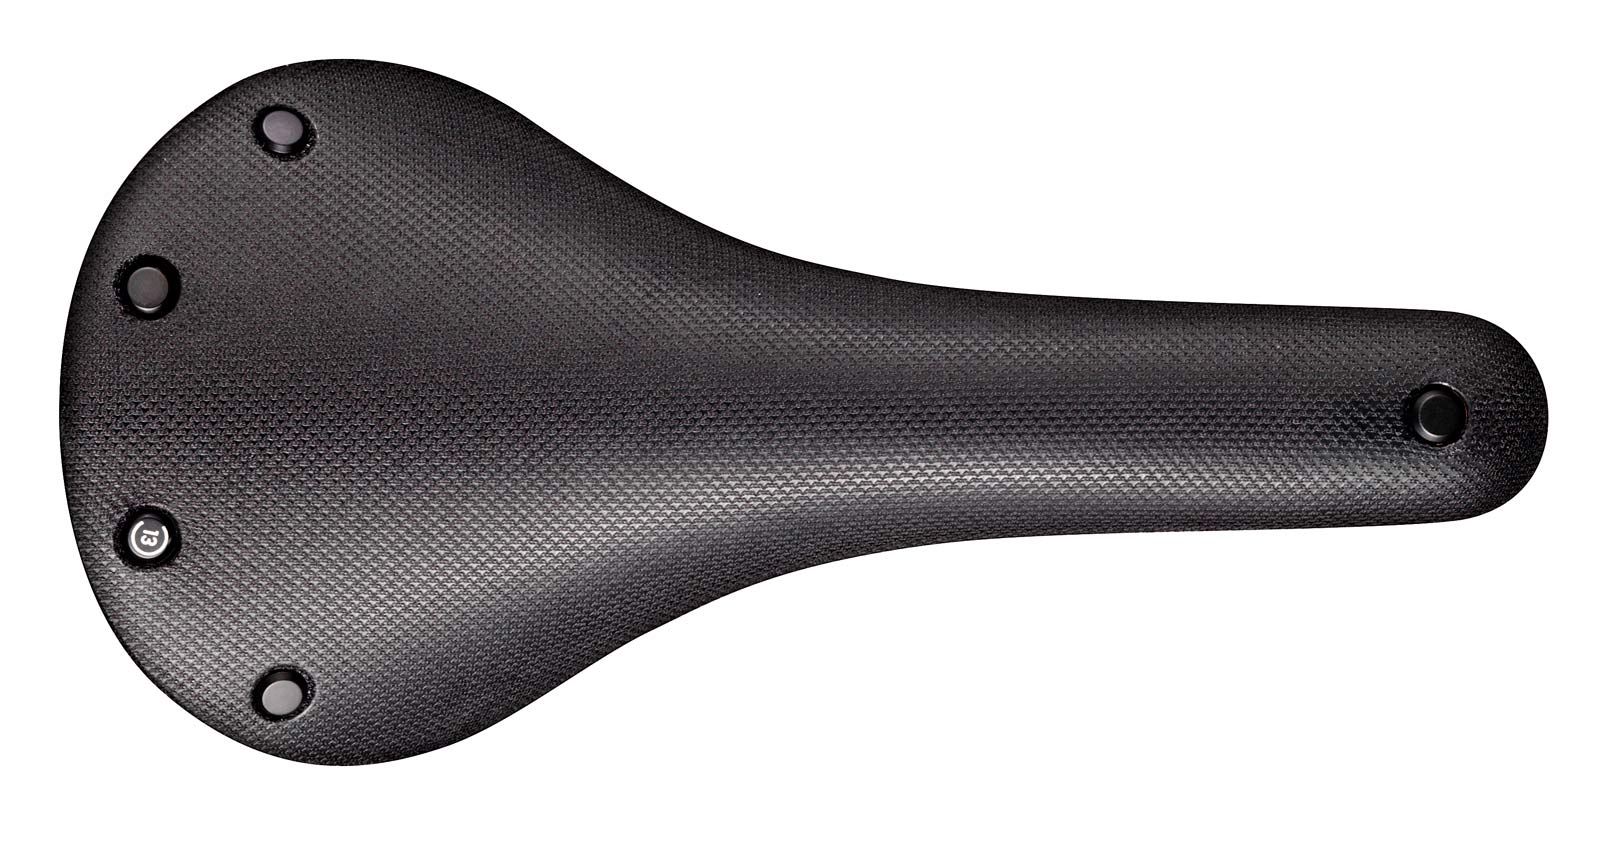 Brooks Cambium C13 All-Weather saddle_waterproof rubber nylon carbon-railed lightweight performance bicycle saddle